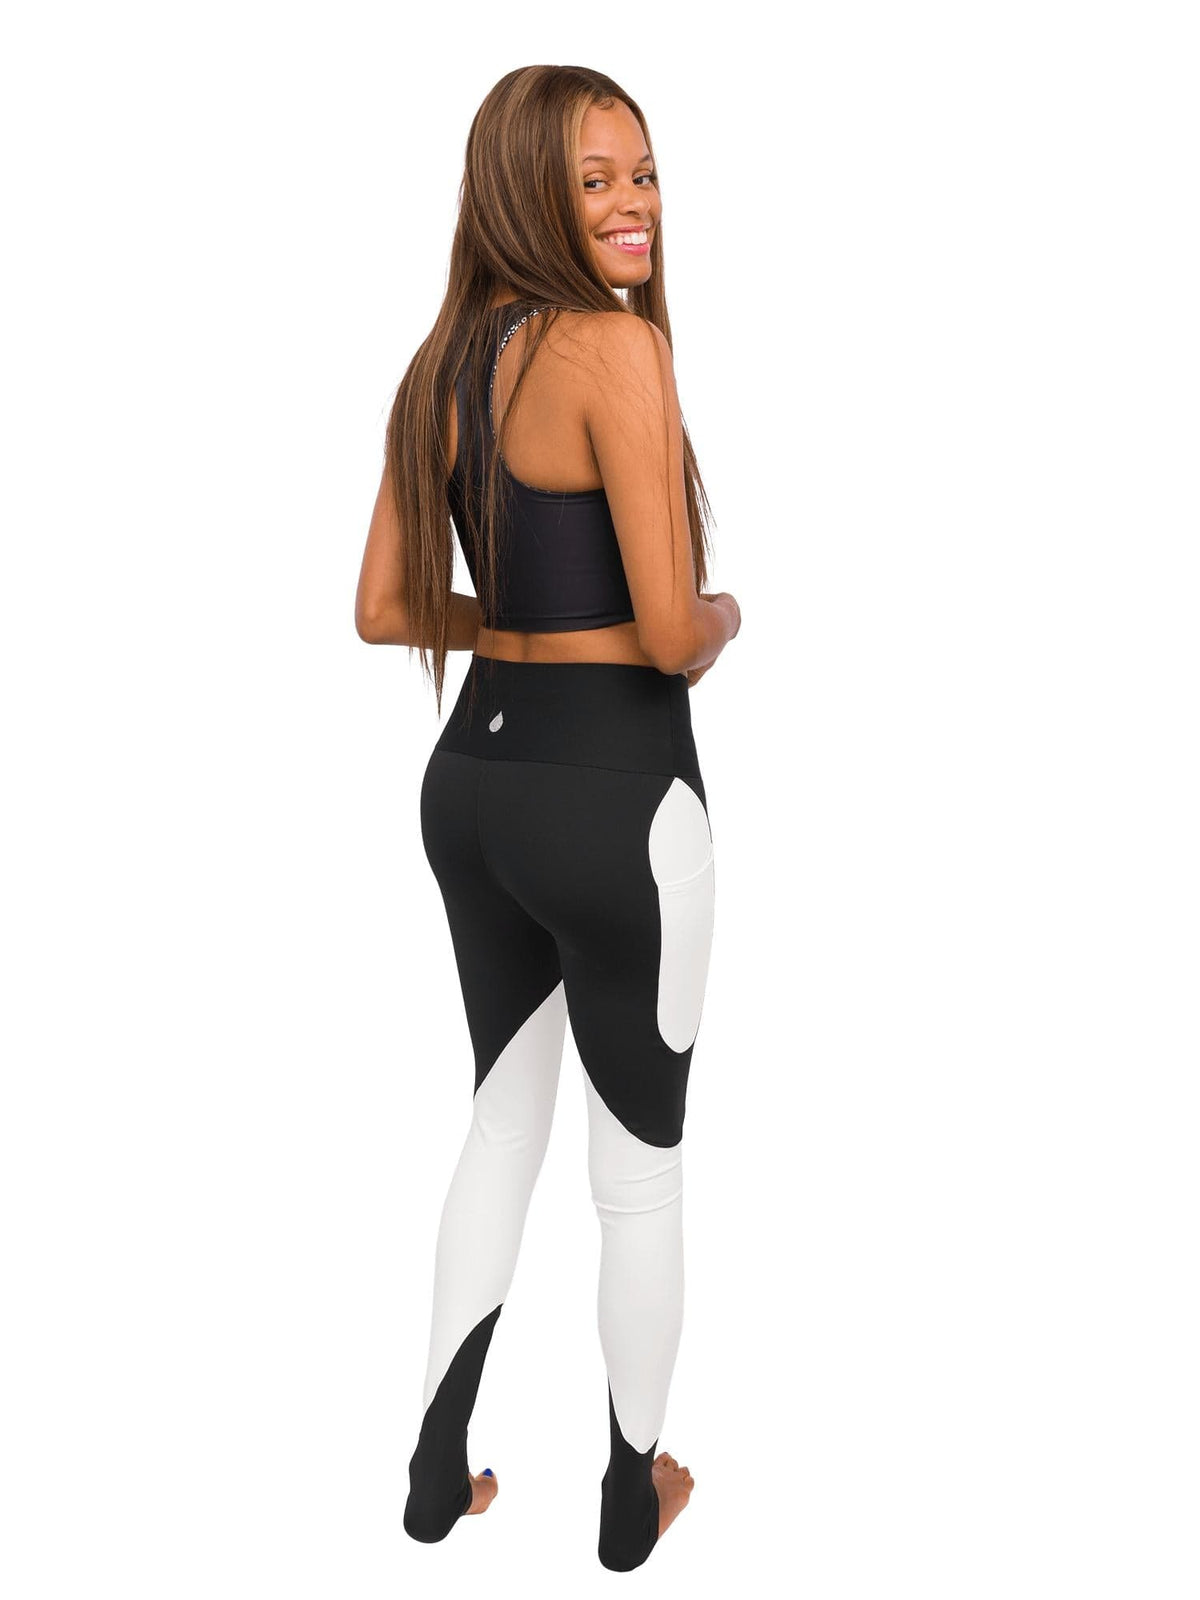 Model: Syriah is a sea turtle conservation biologist. She is 5&#39;7&quot;, 111 lbs and is wearing a size XS leggings with an XS spotted eagle ray top (reverse side).